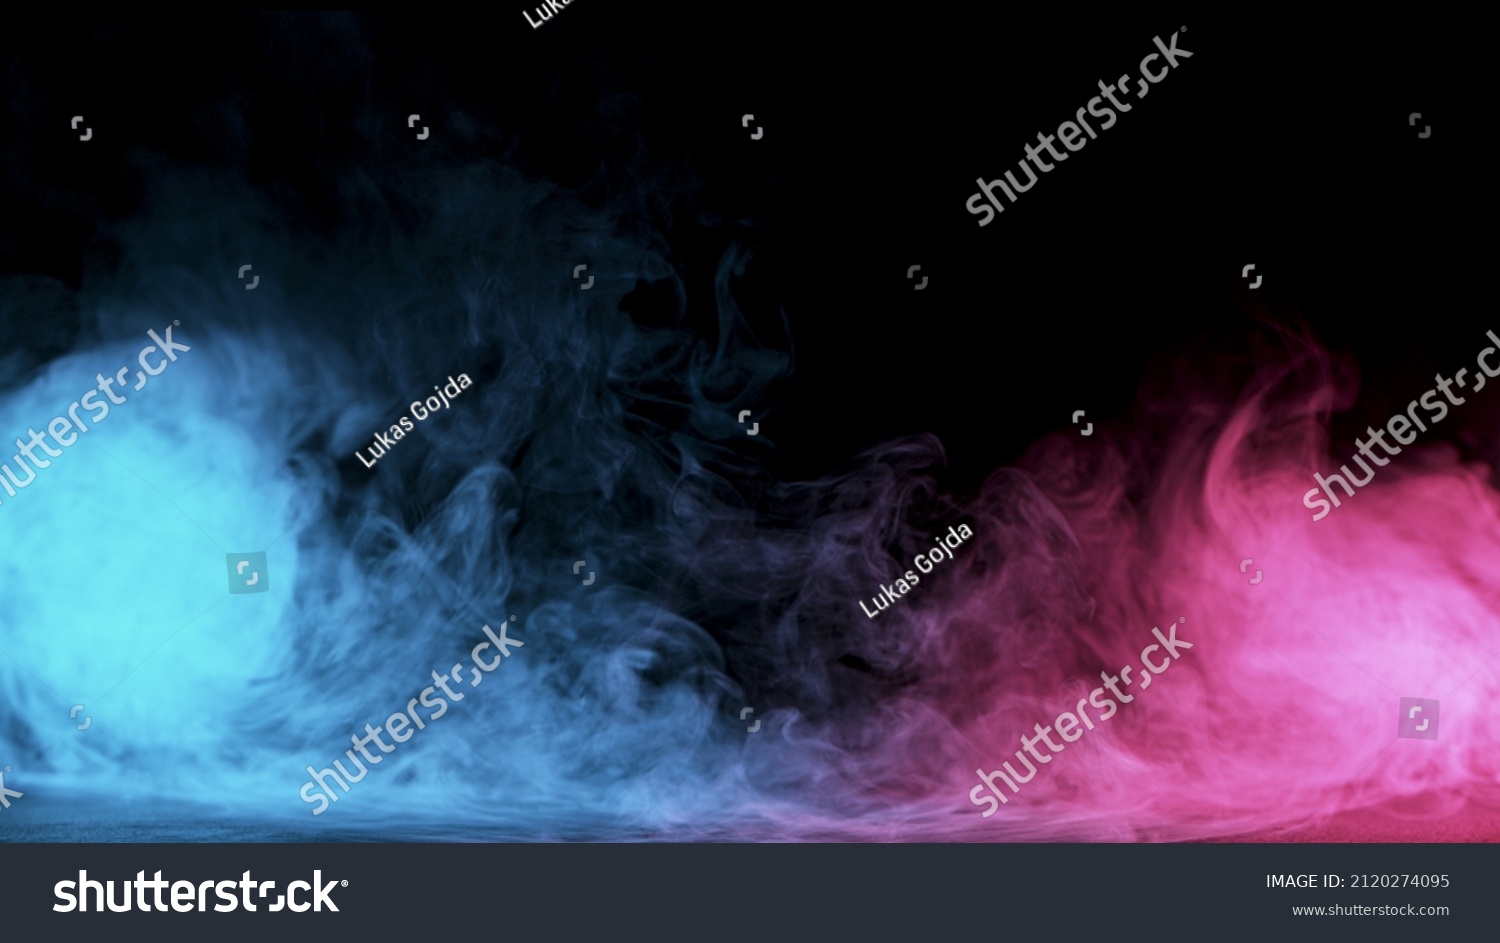 Atmospheric smoke, abstract color background, close-up. #2120274095